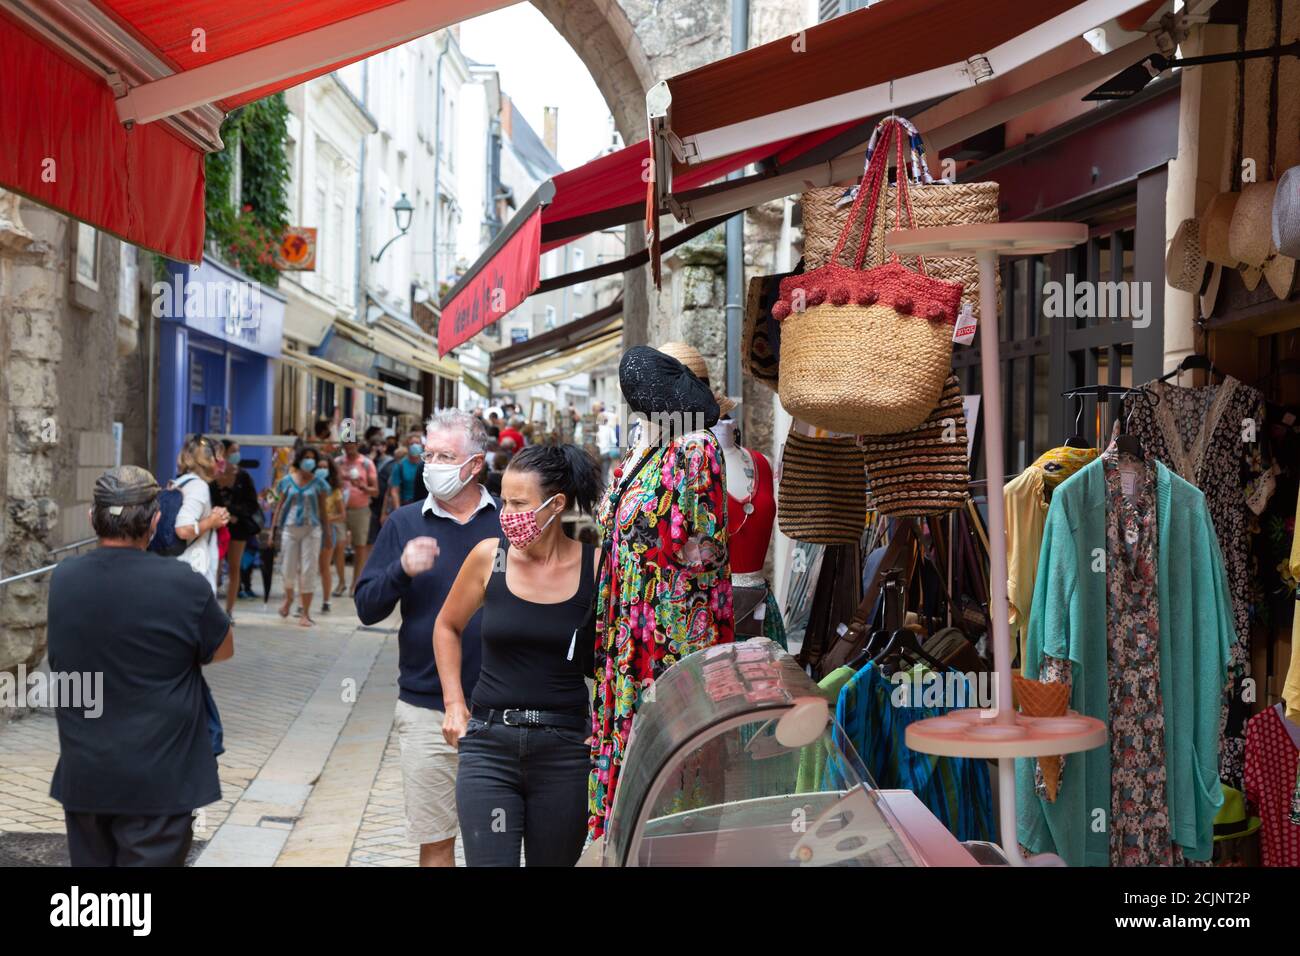 France street scene during the COVID 19 virus pandemic with people wearing masks in the street, Amboise old town, Loire Valley France Europe, Aug 2020 Stock Photo